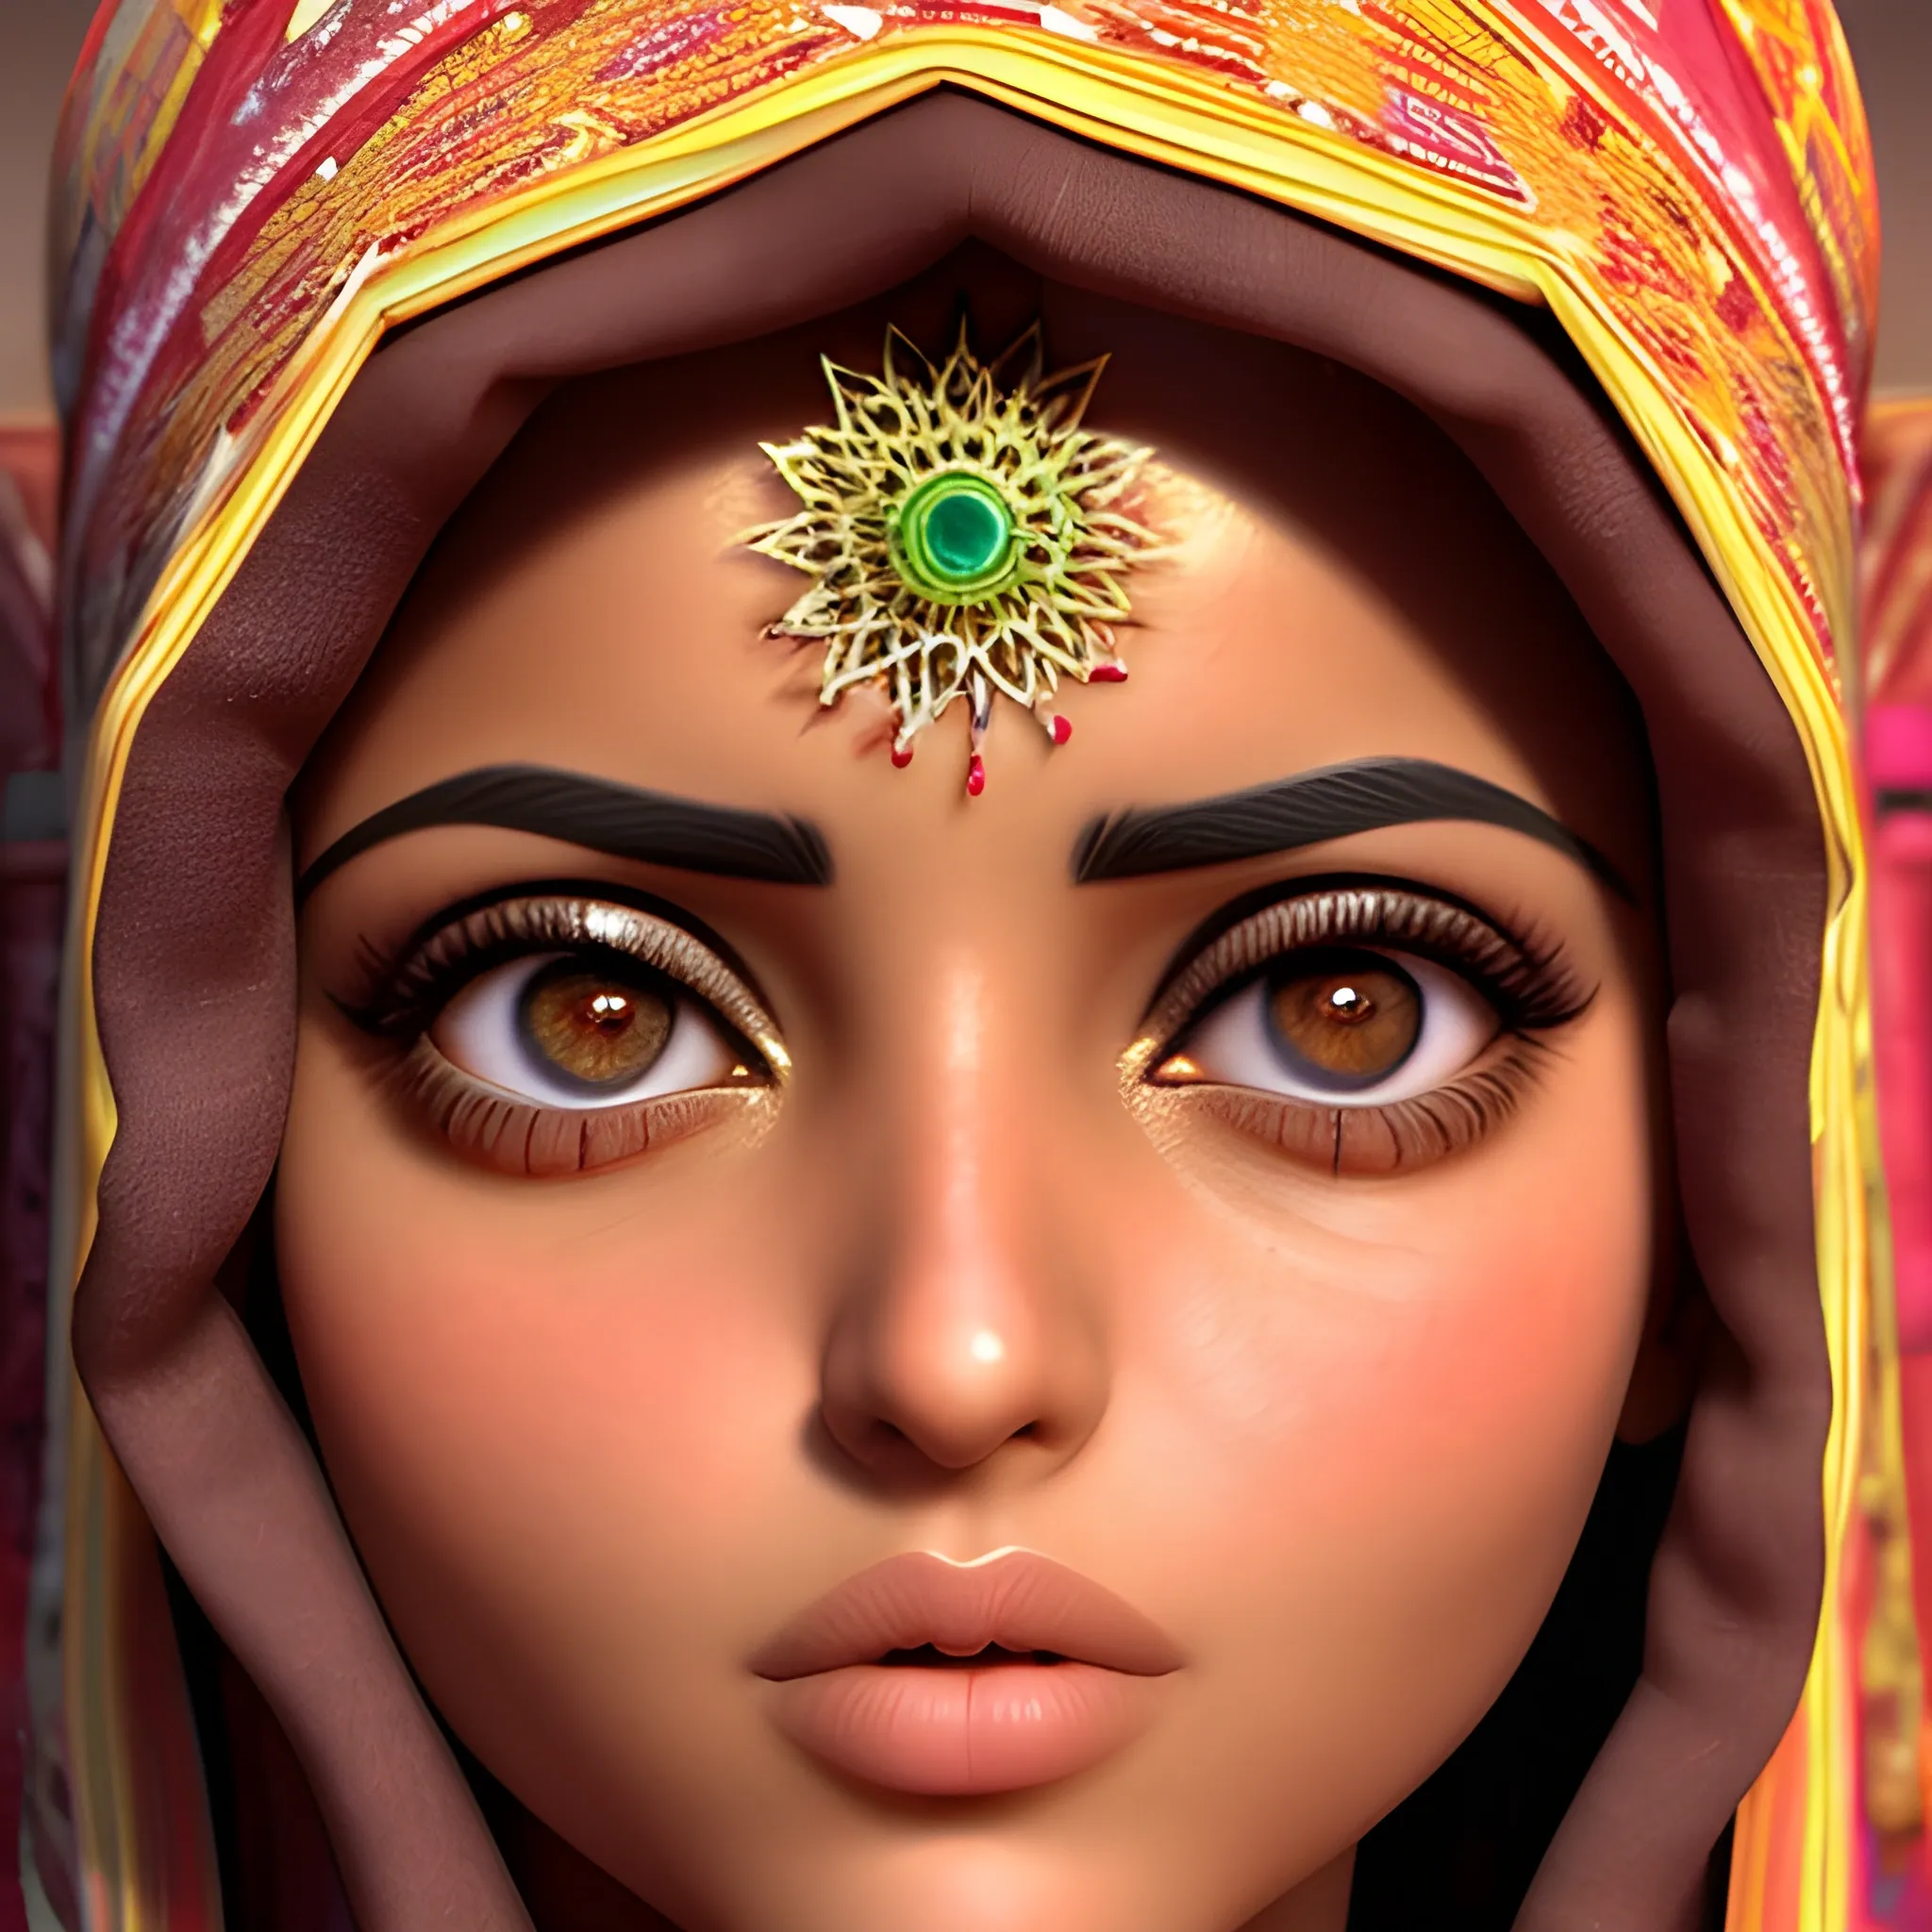 Moroccan beauty, big eyes, extreme picture quality, ambient light, exquisite facial features, 3D